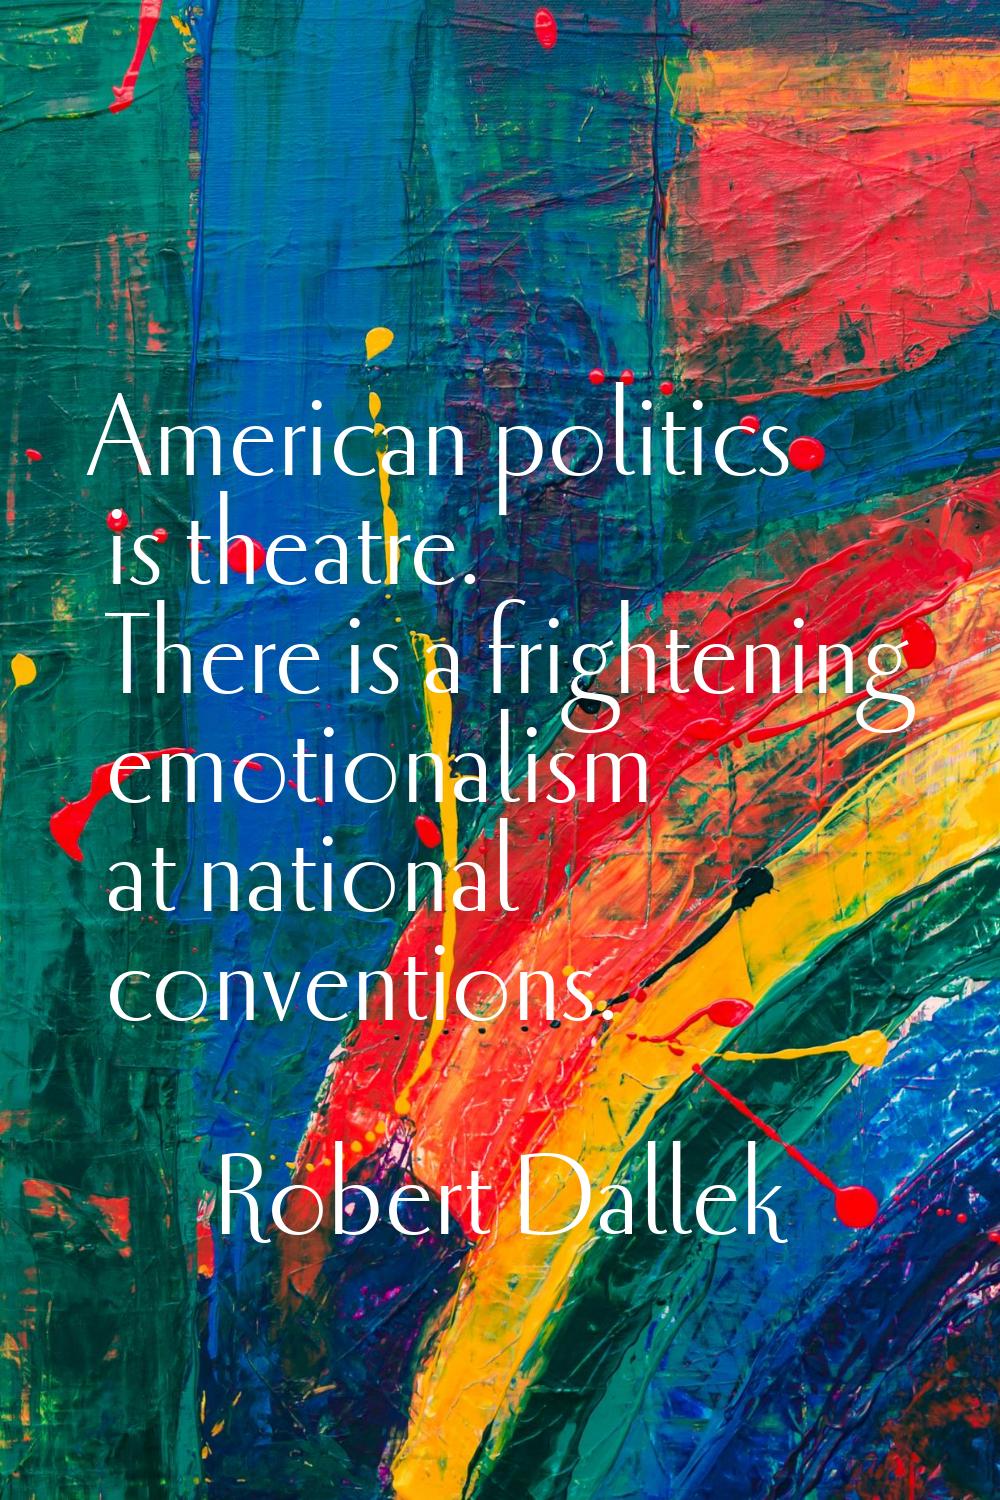 American politics is theatre. There is a frightening emotionalism at national conventions.